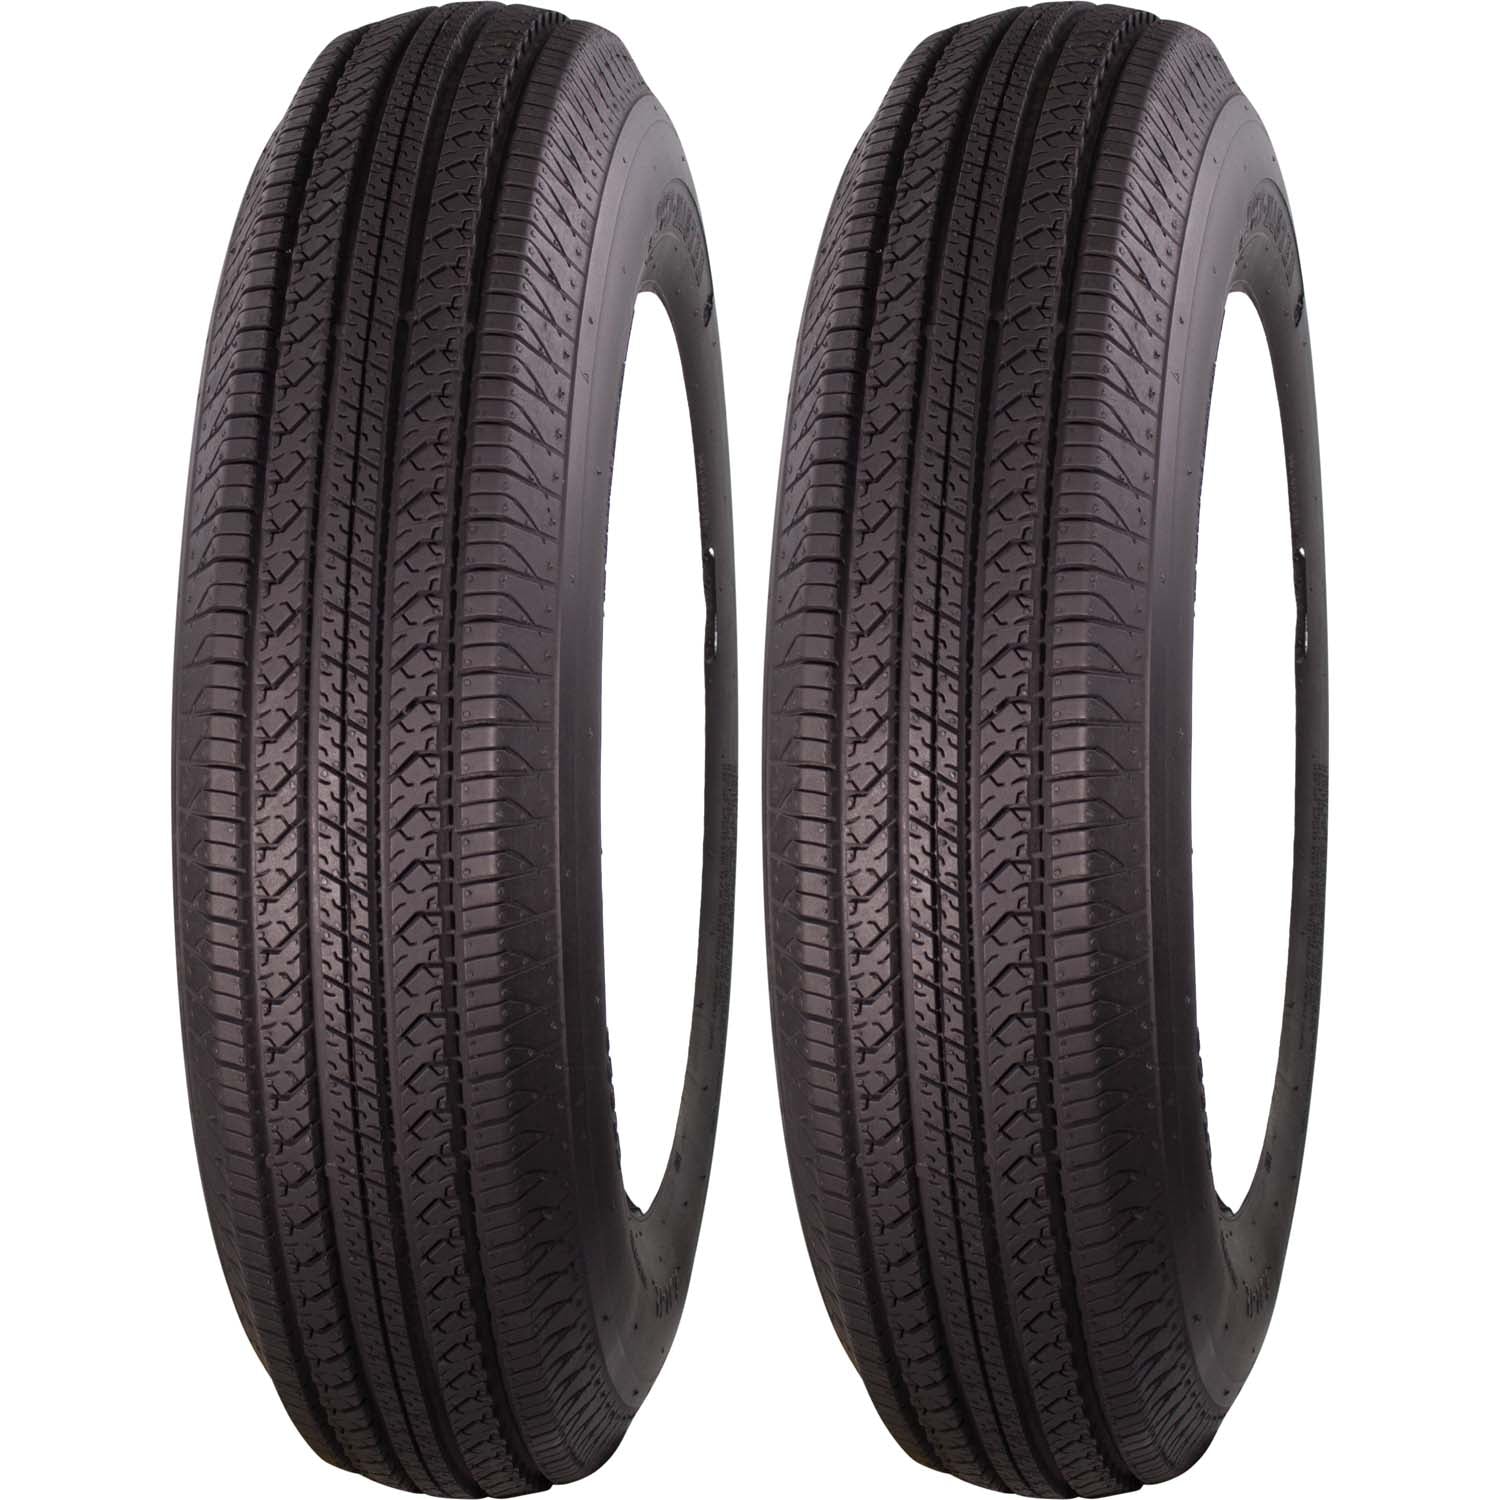 Greenball Towmaster ST HT329 Trailer Tire LRC 6ply 4.80-8 Pack of 2